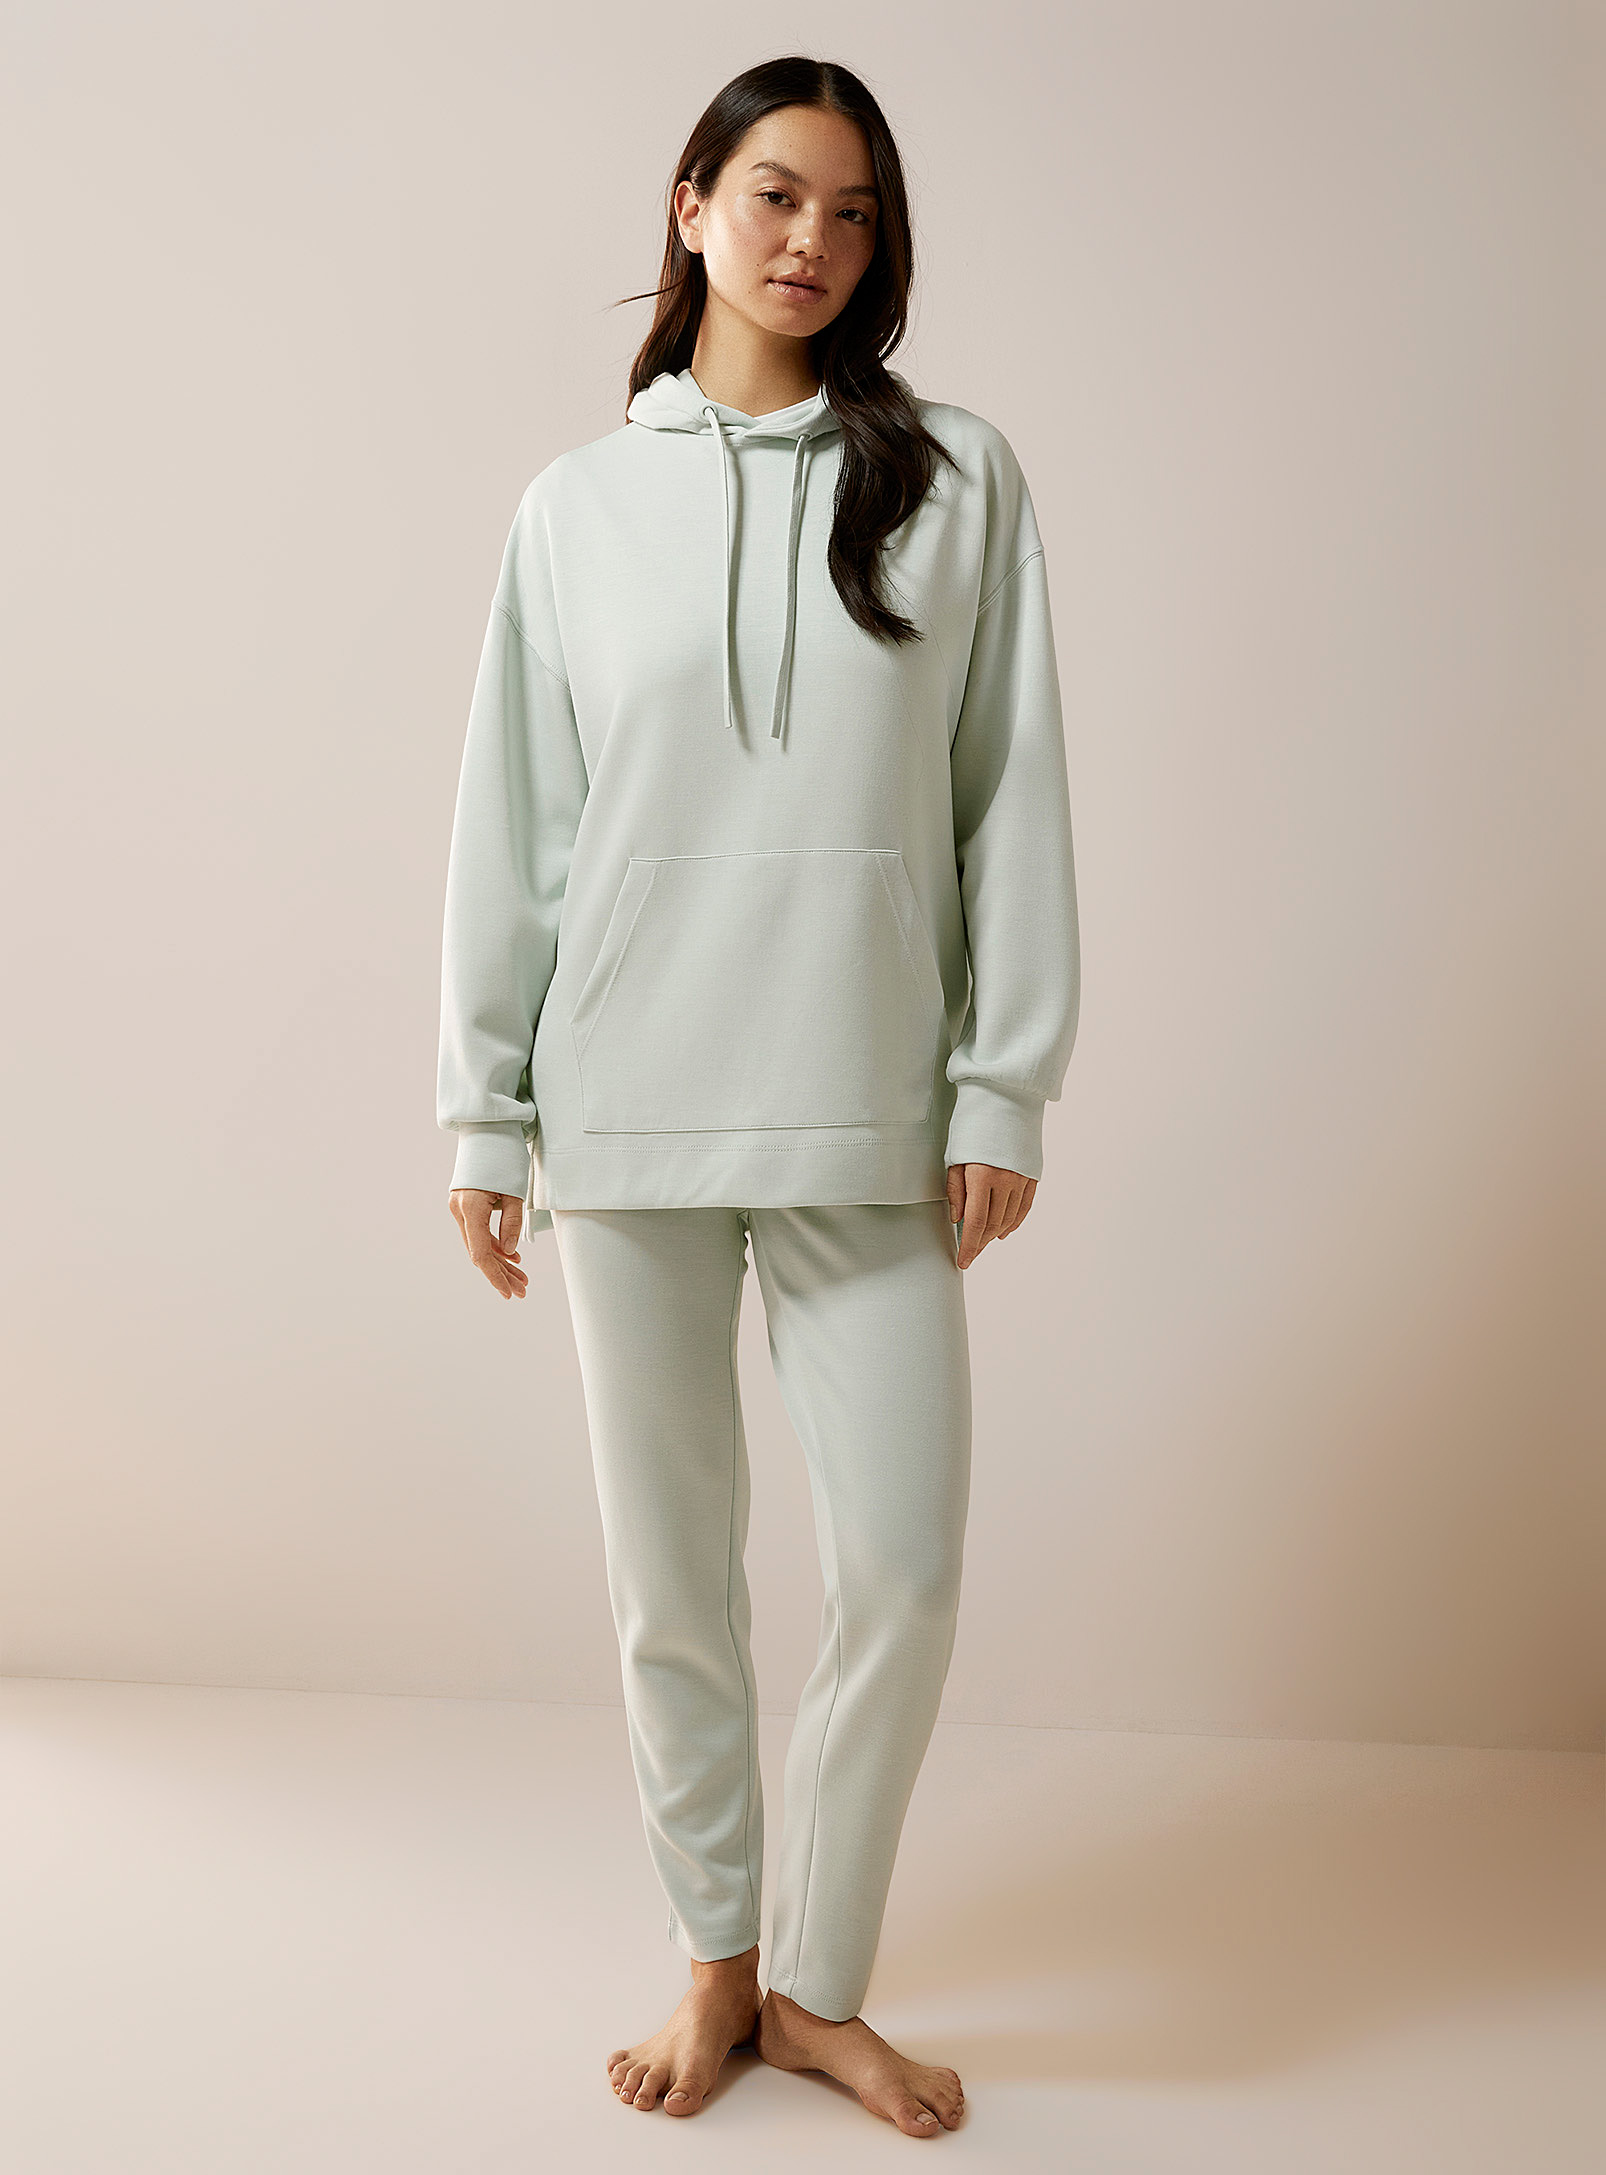 Everyday Sunday Soothing Mint Lounge Pant In Baby Blue